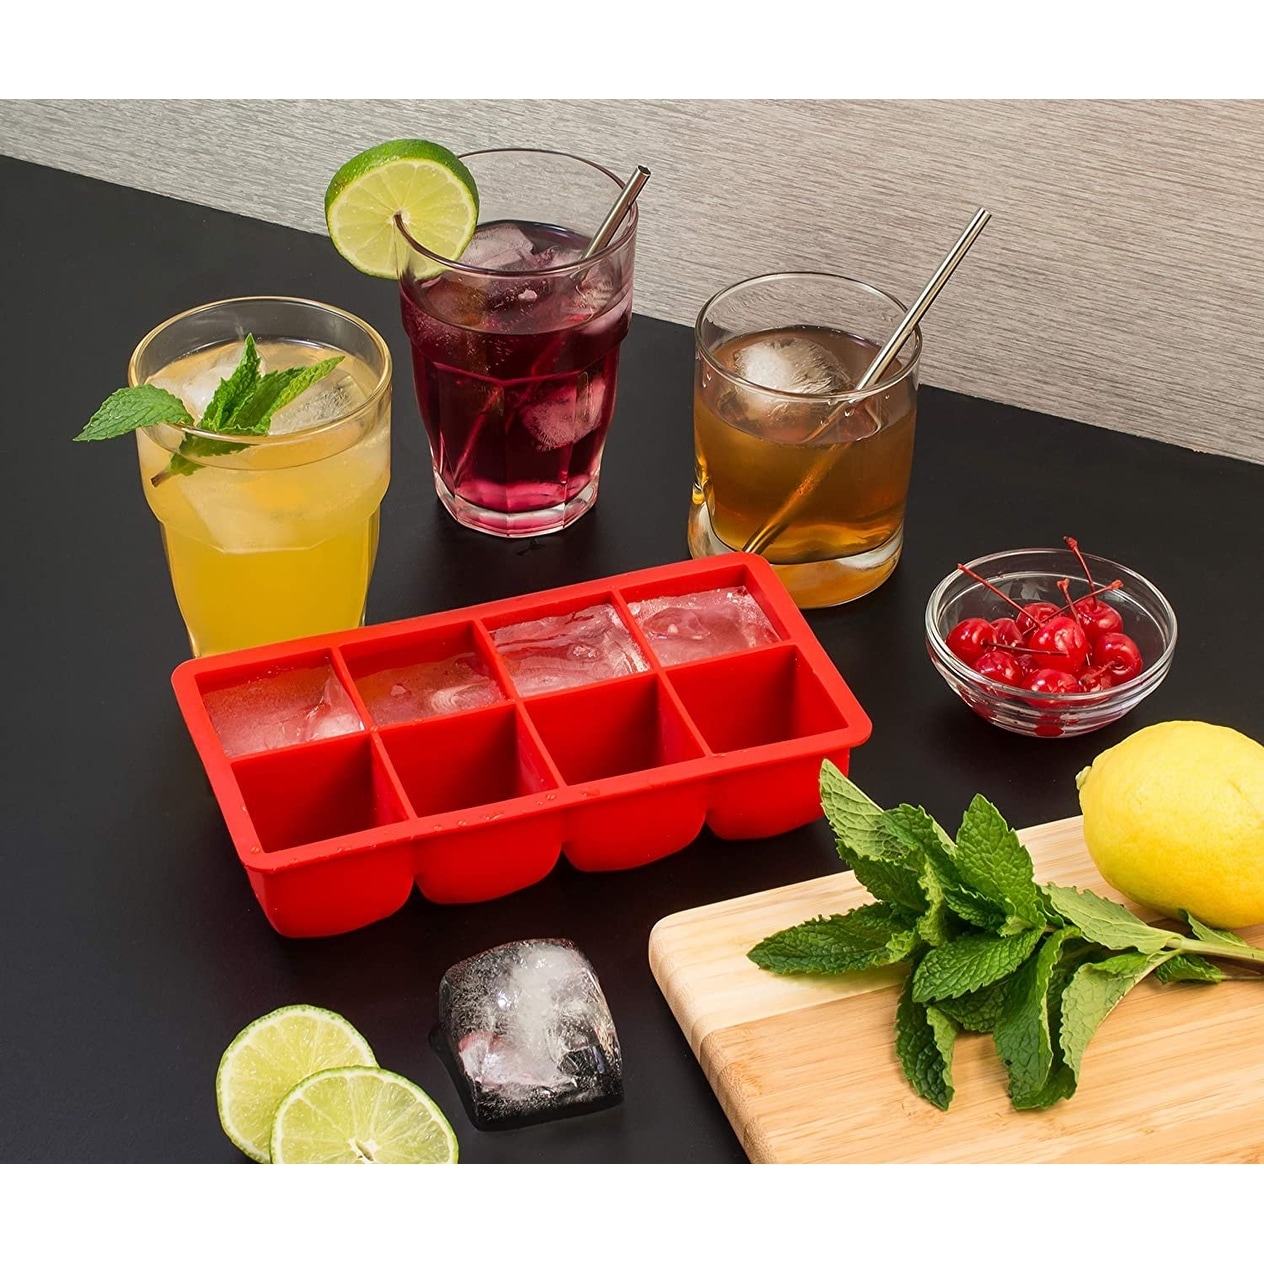 https://ak1.ostkcdn.com/images/products/is/images/direct/7a963f588b0bbca7576739f4173440dcac972f0f/HIC-Red-Silicone-Big-Block-Ice-Cube-Tray-and-Baking-Mold---Makes-8-Oversized-Cubes.jpg